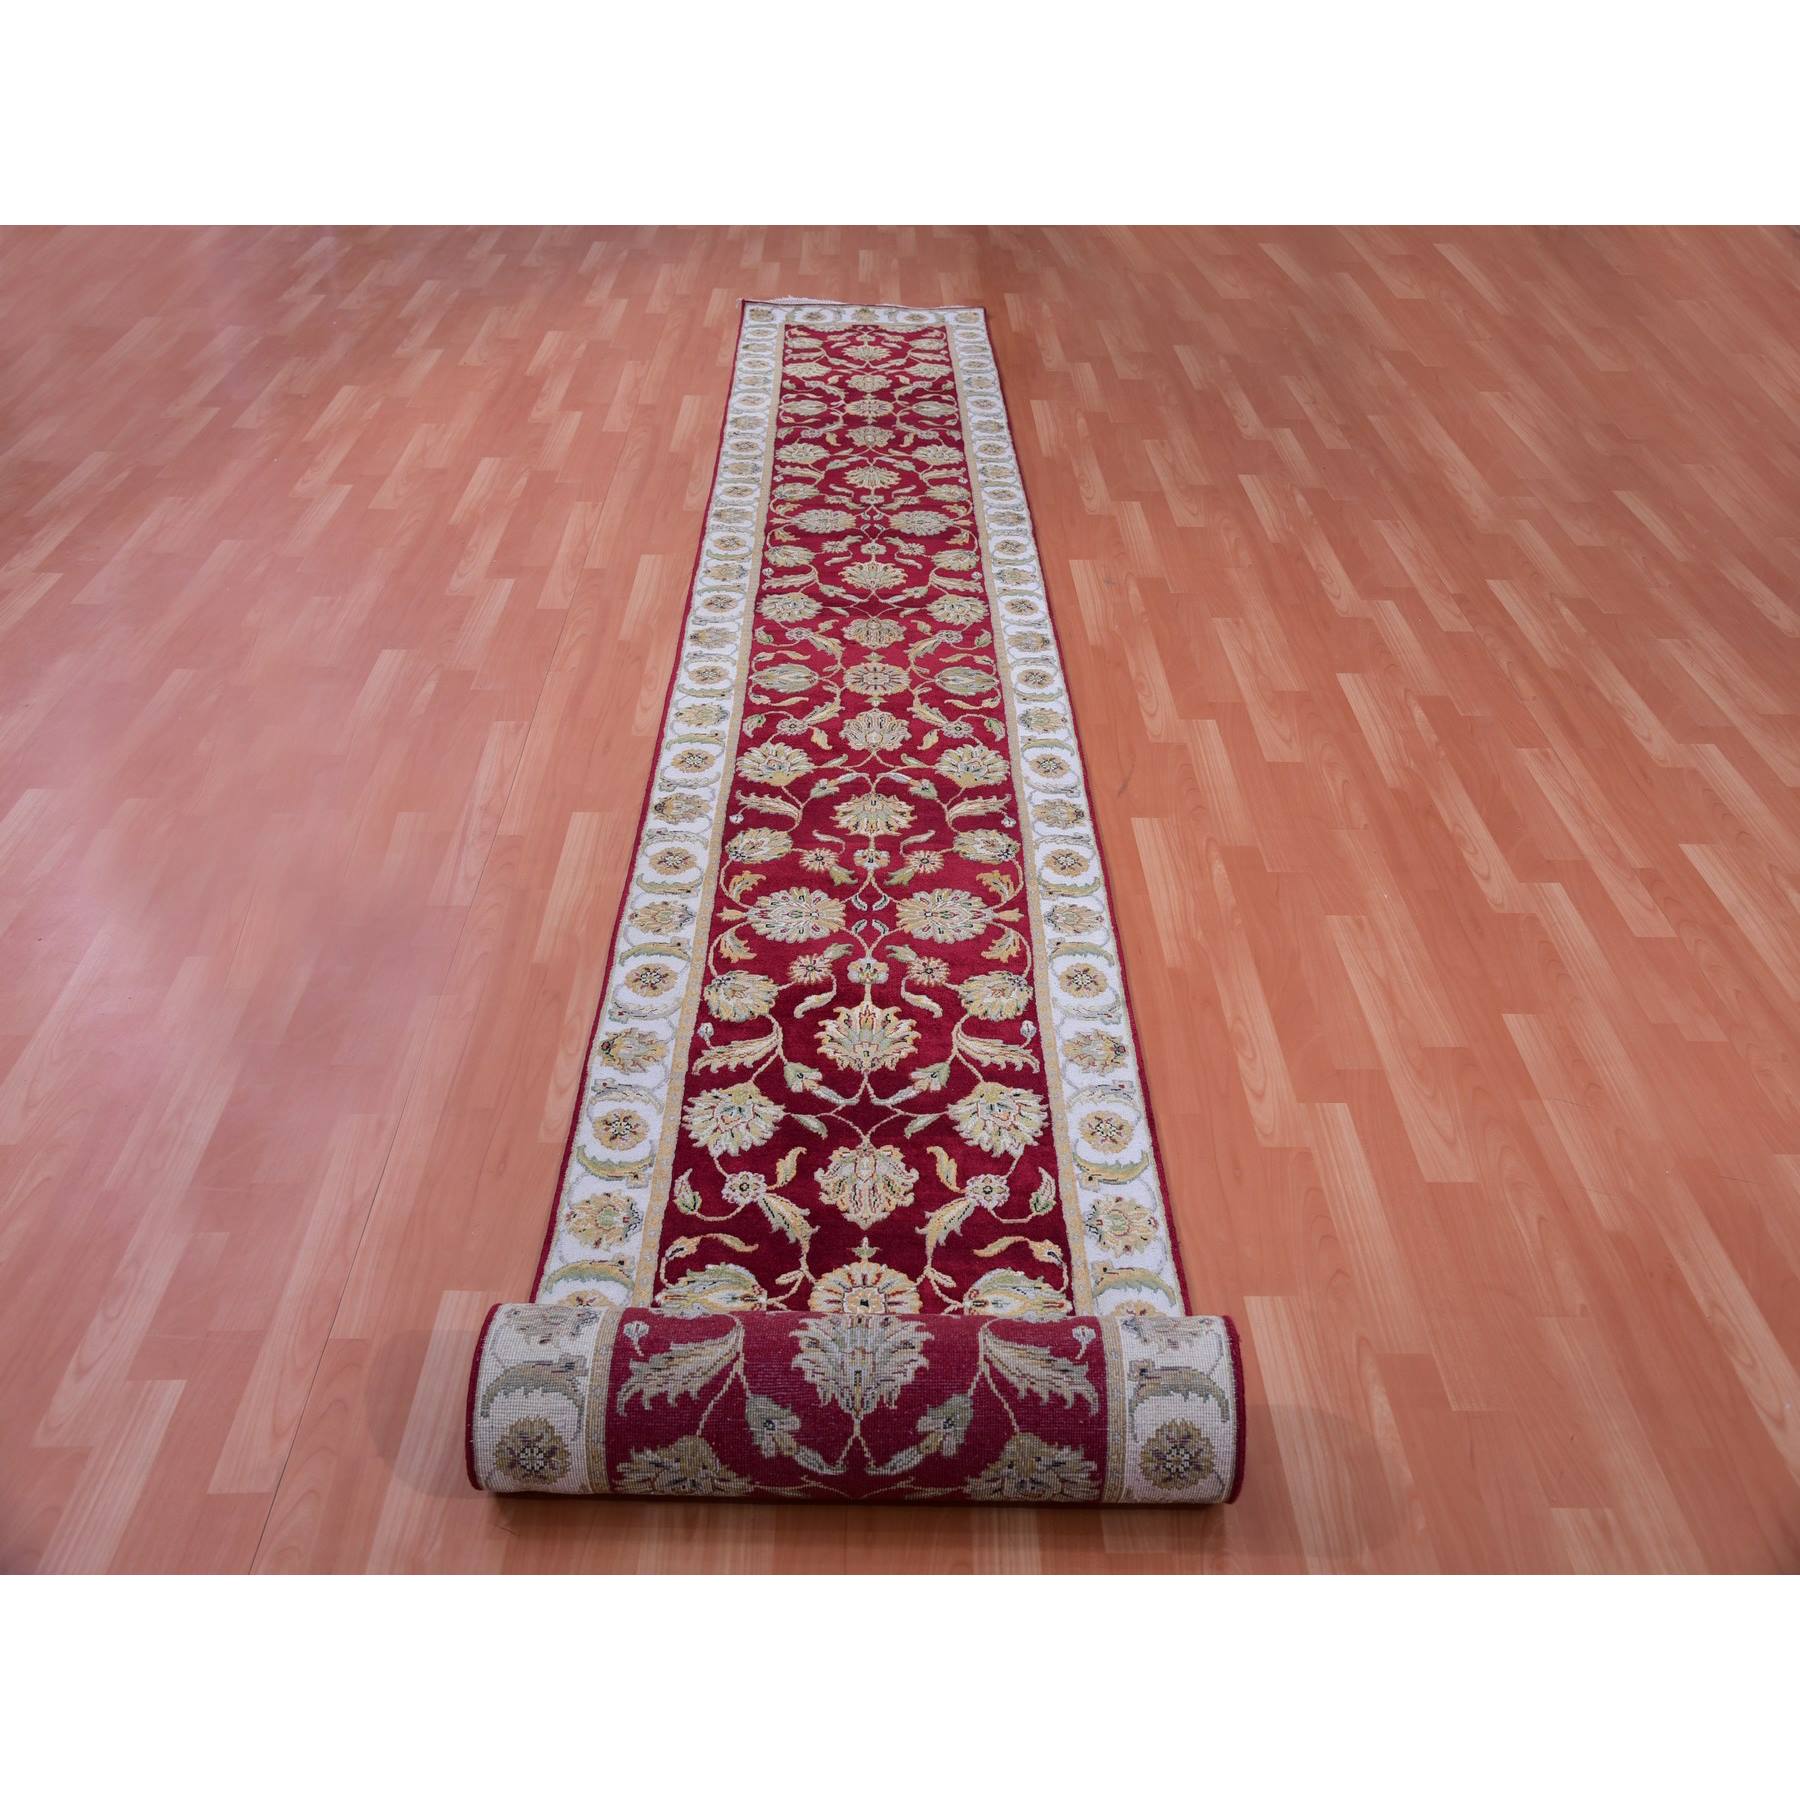 Rajasthan-Hand-Knotted-Rug-376850